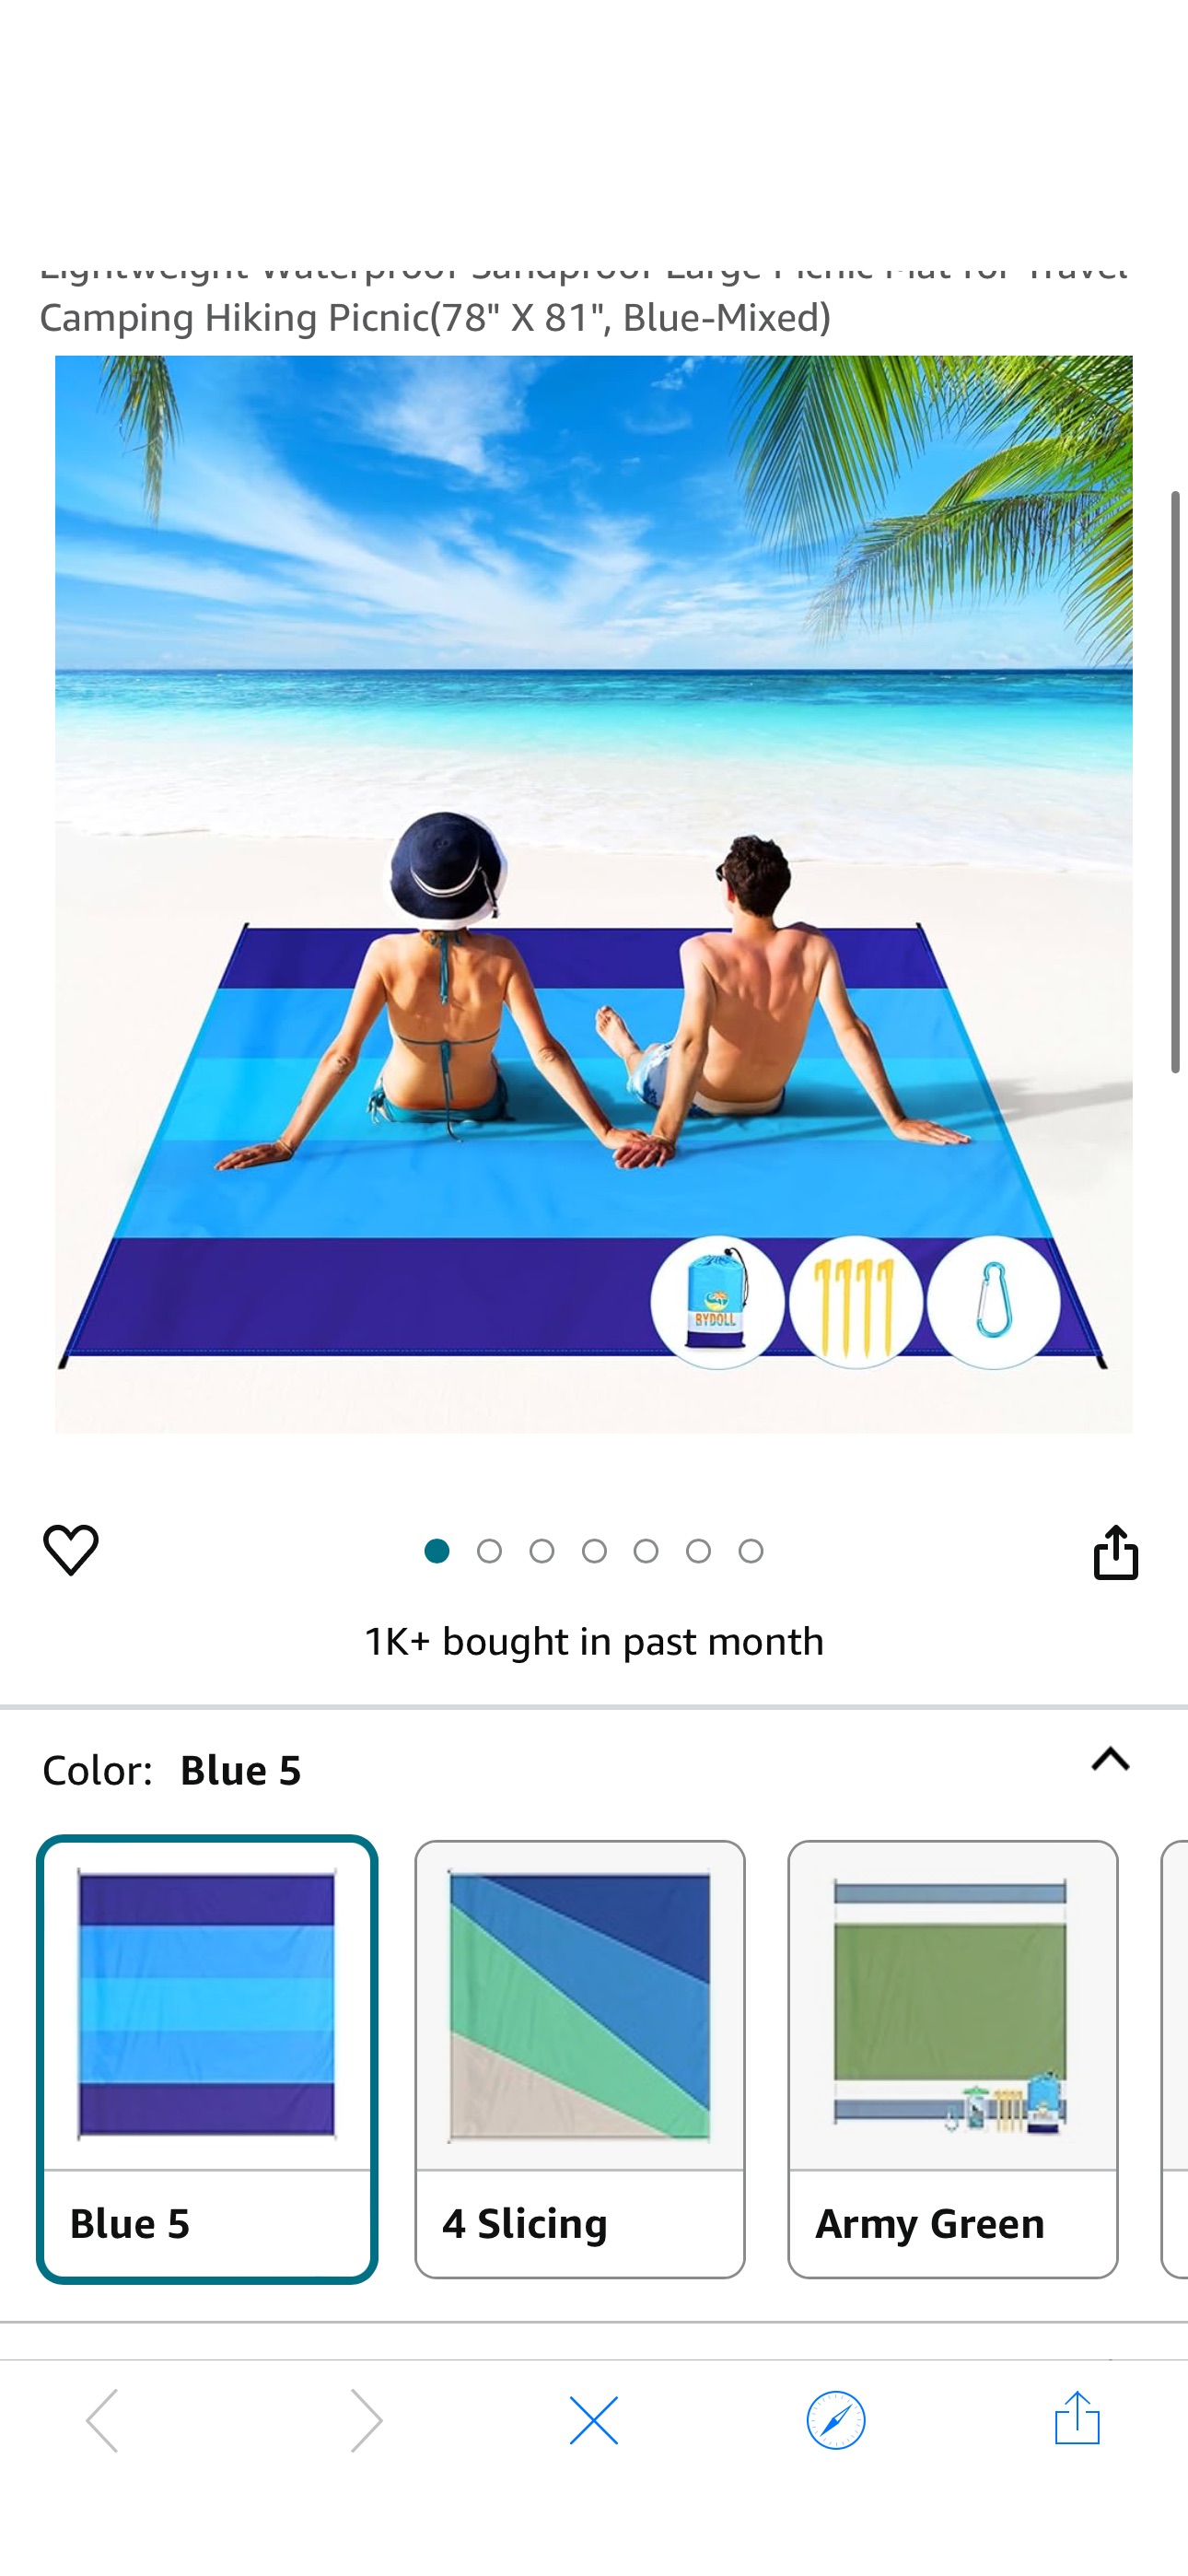 Amazon.com: BYDOLL Beach Blanket 78''×81'' 4-7 Adults Oversized Lightweight Waterproof Sandproof Large Picnic Mat for Travel Camping Hiking Picnic(78" X 81", Blue-Mixed) : Sports & Outdoors